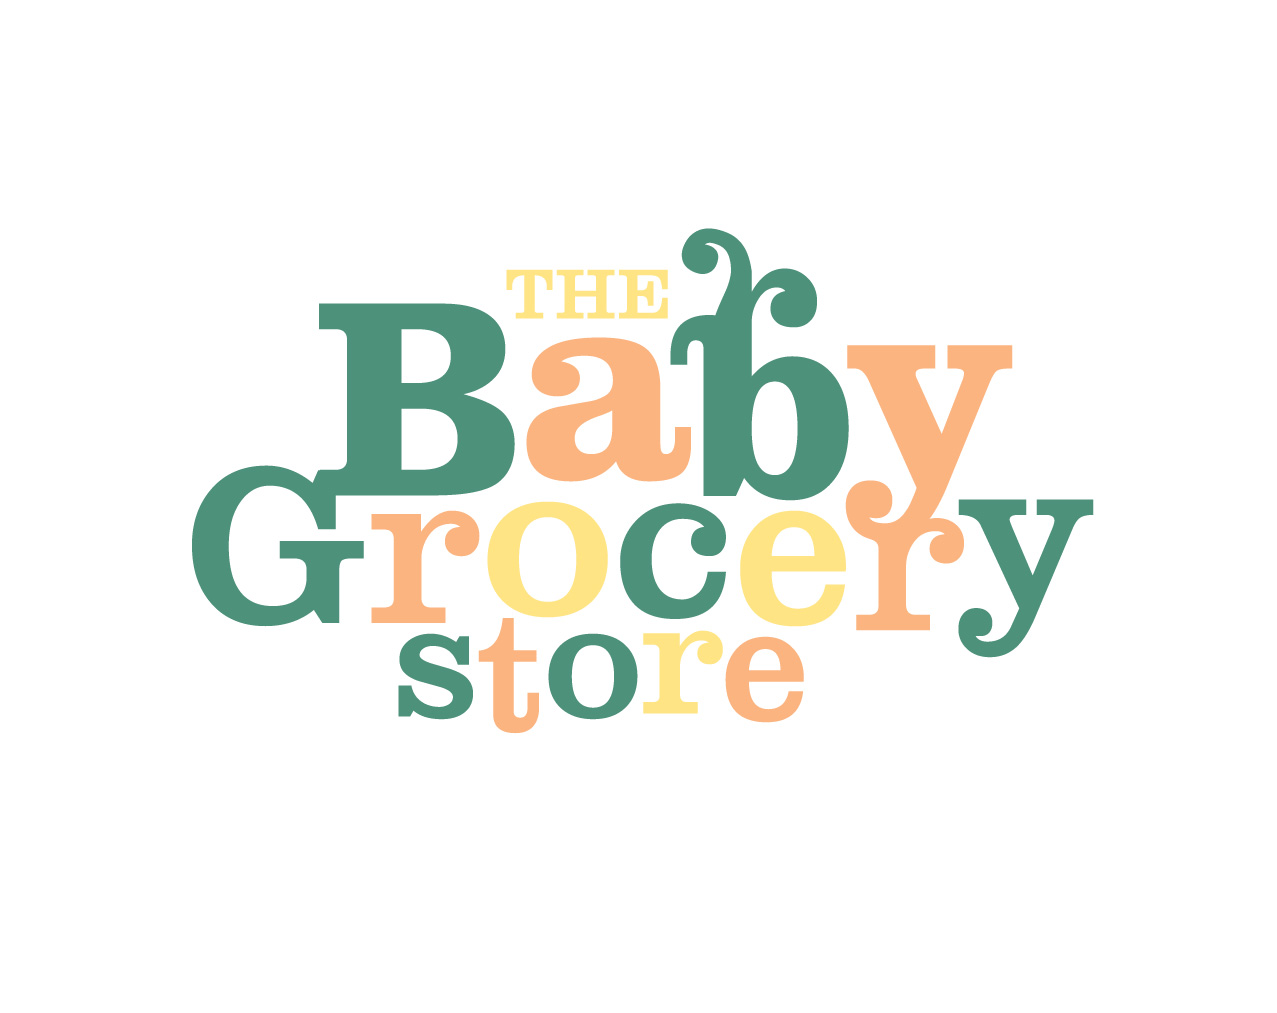 The Baby Grocery Store is passionate about providing and caring for the next generation.